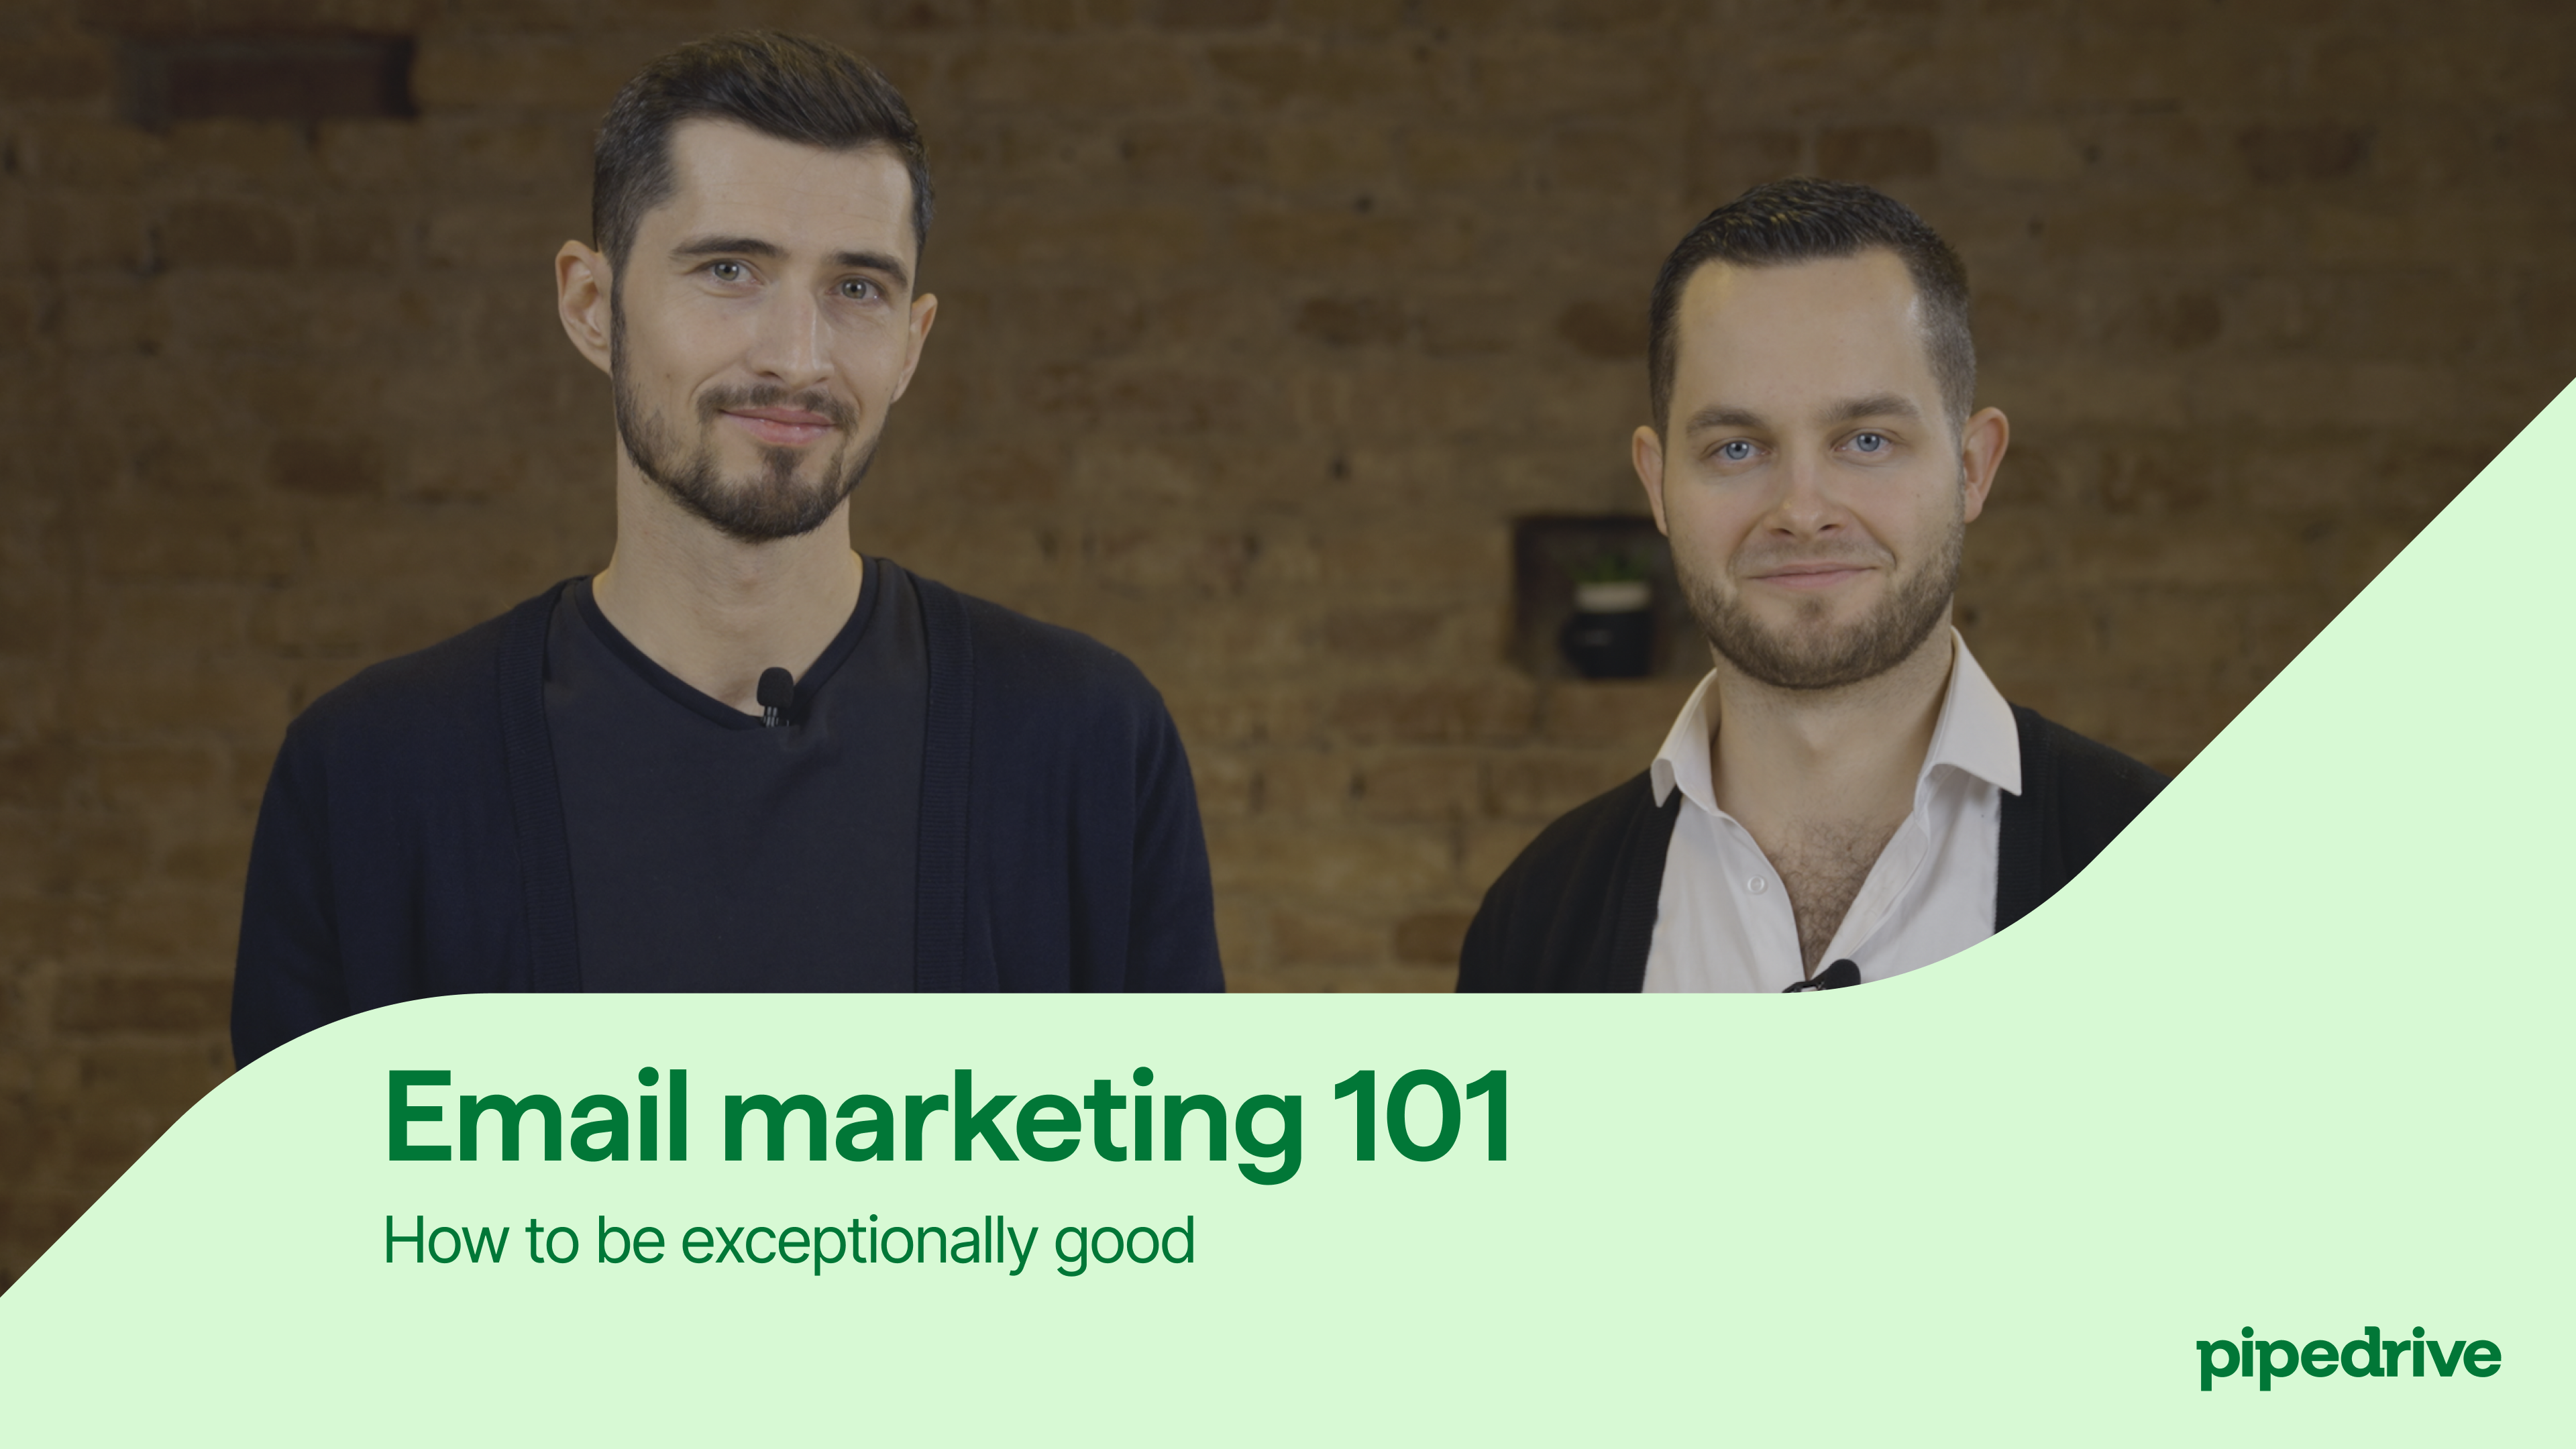 Welcome to the email marketing 101: how to be exceptionally good